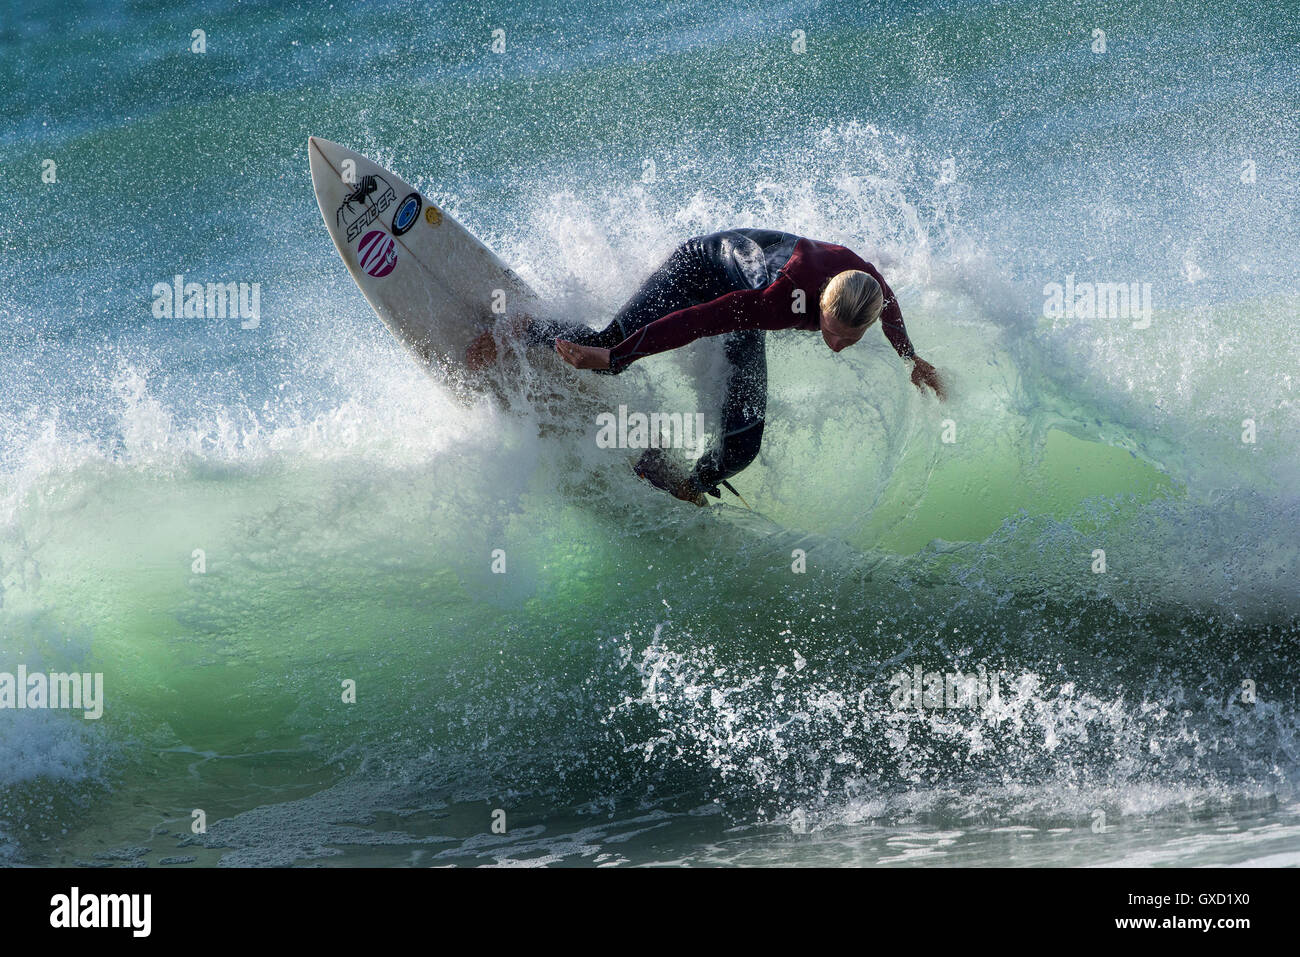 A surfer in spectacular action at Fistral in Newquay, Cornwall. UK. Stock Photo